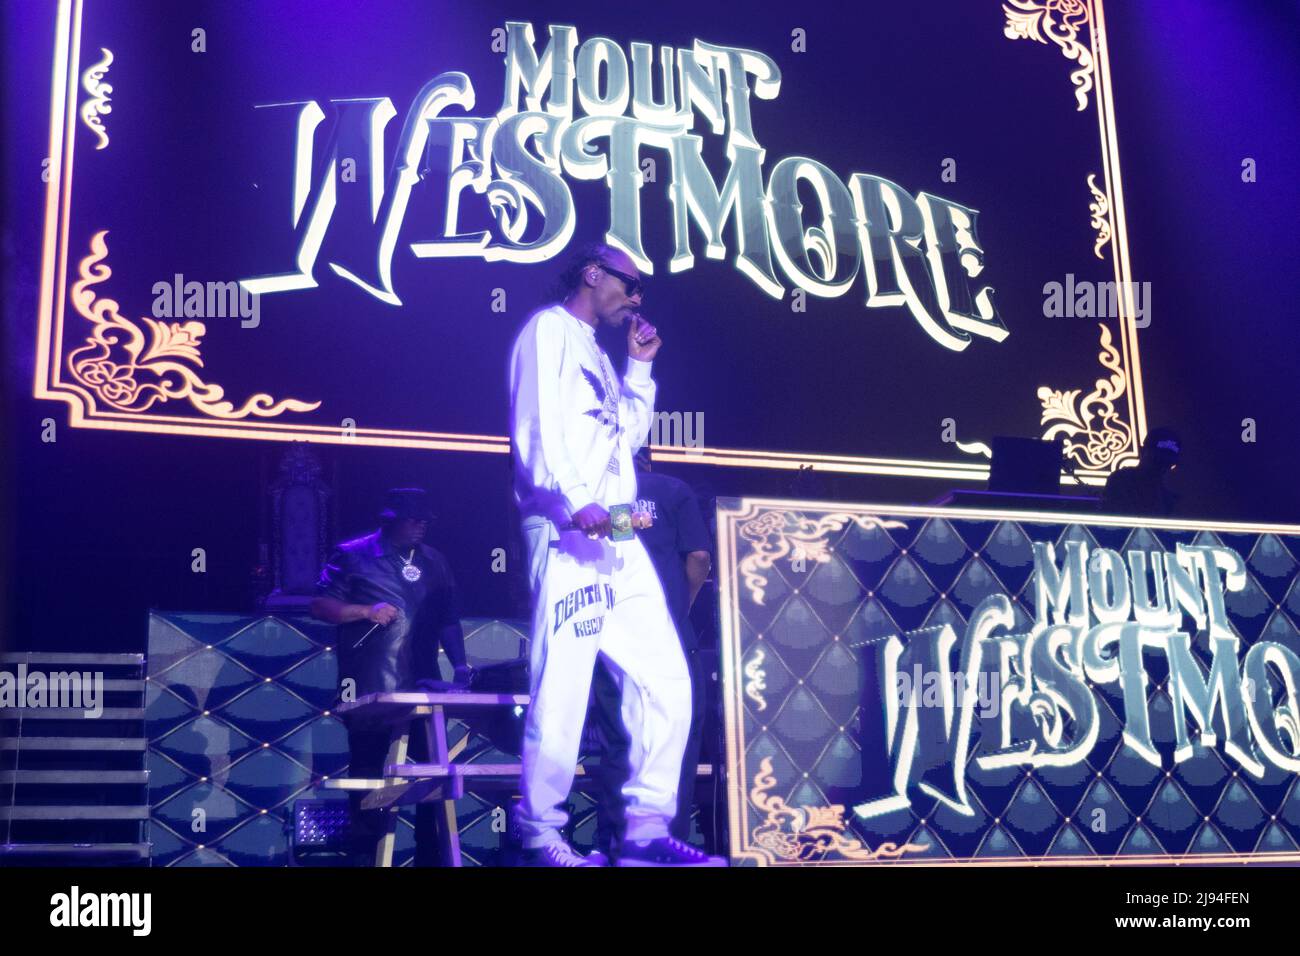 E-40 and Snoop Dogg perform with Mount Westmore on Thursday, May 19, 2022 at Pechanga Arena in San Diego, California. Mount Westmore is a hip hop supergroup that includes Snoop Dogg, Ice Cube, E-40, and Too Short. They will be releasing their debut album later this year. (Photo by Rishi Deka/Sipa USA) Credit: Sipa USA/Alamy Live News Stock Photo